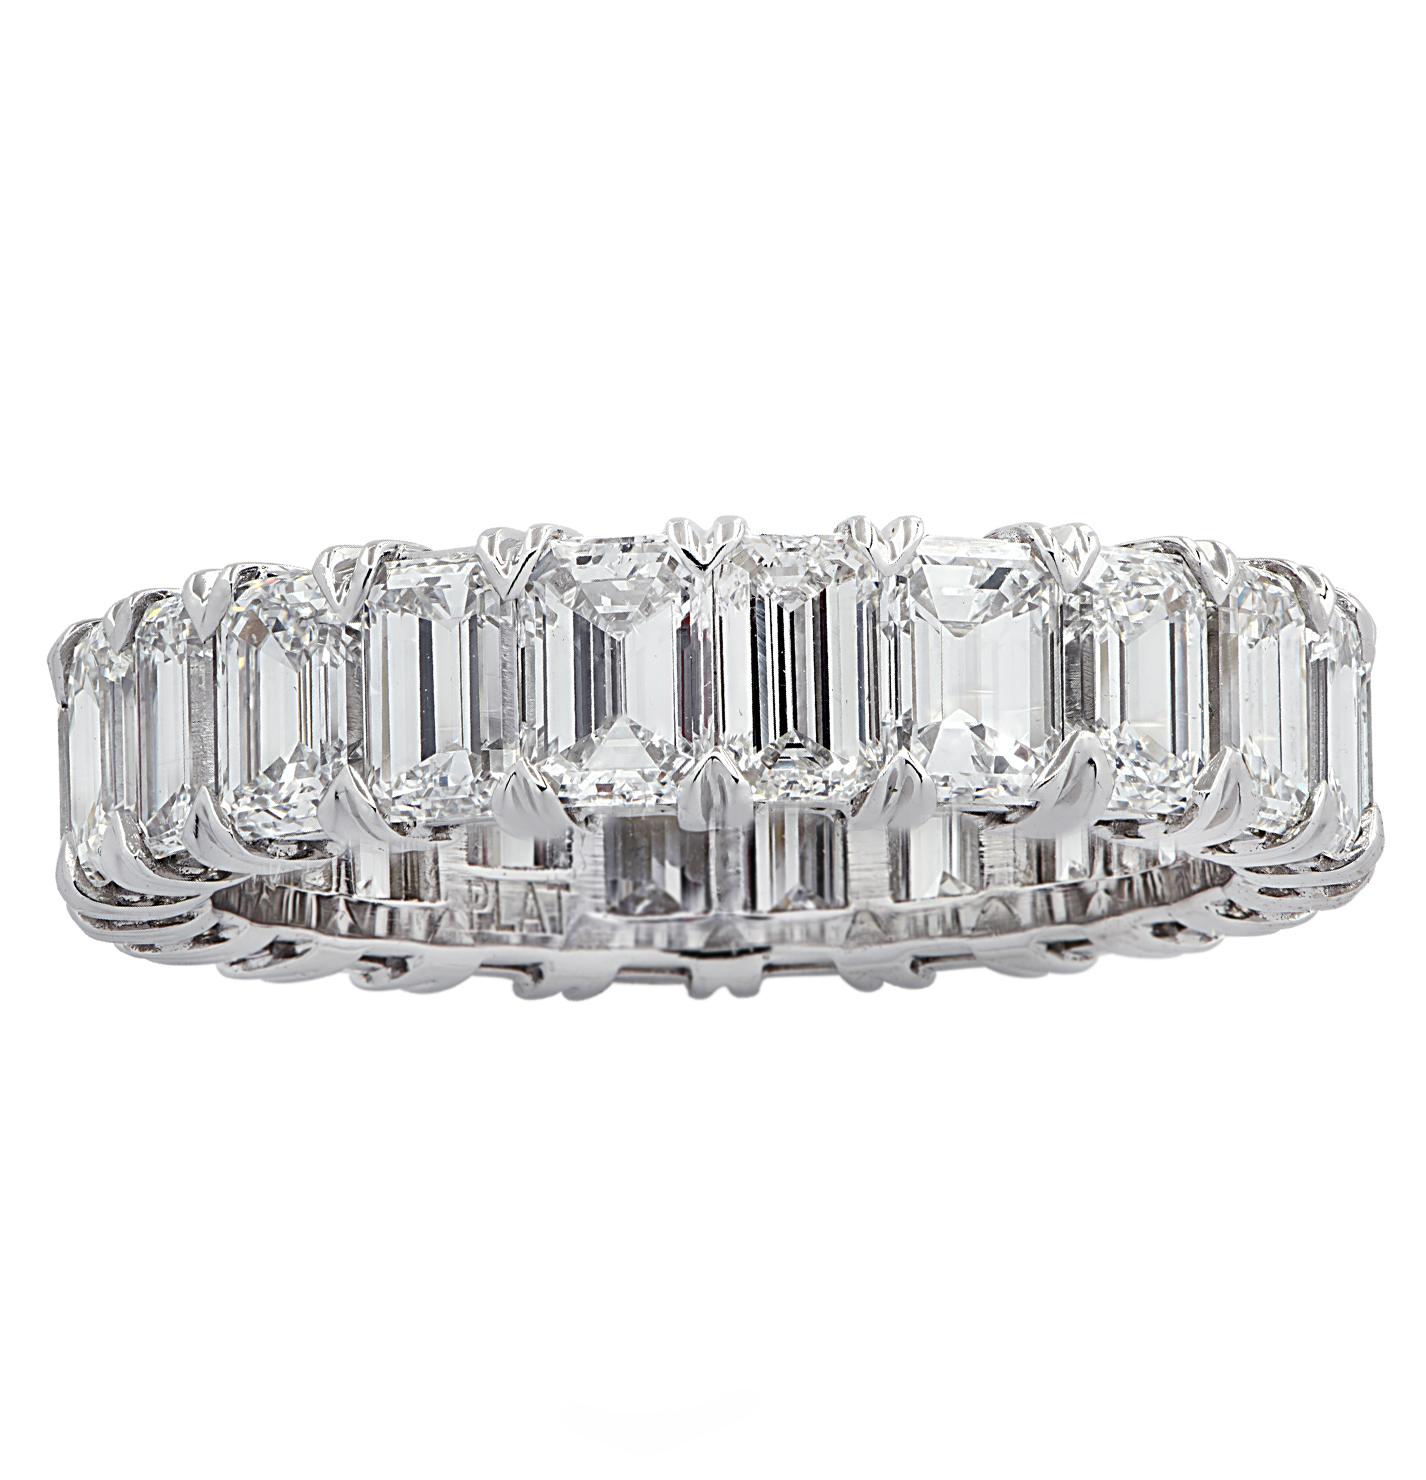 Exquisite Vivid Diamonds eternity band crafted by hand in Platinum, showcasing 22 stunning emerald cut diamonds weighing 5.42 carats total, D-F color, VVS-VS clarity. Each diamond is carefully selected, perfectly matched and set in a seamless sea of